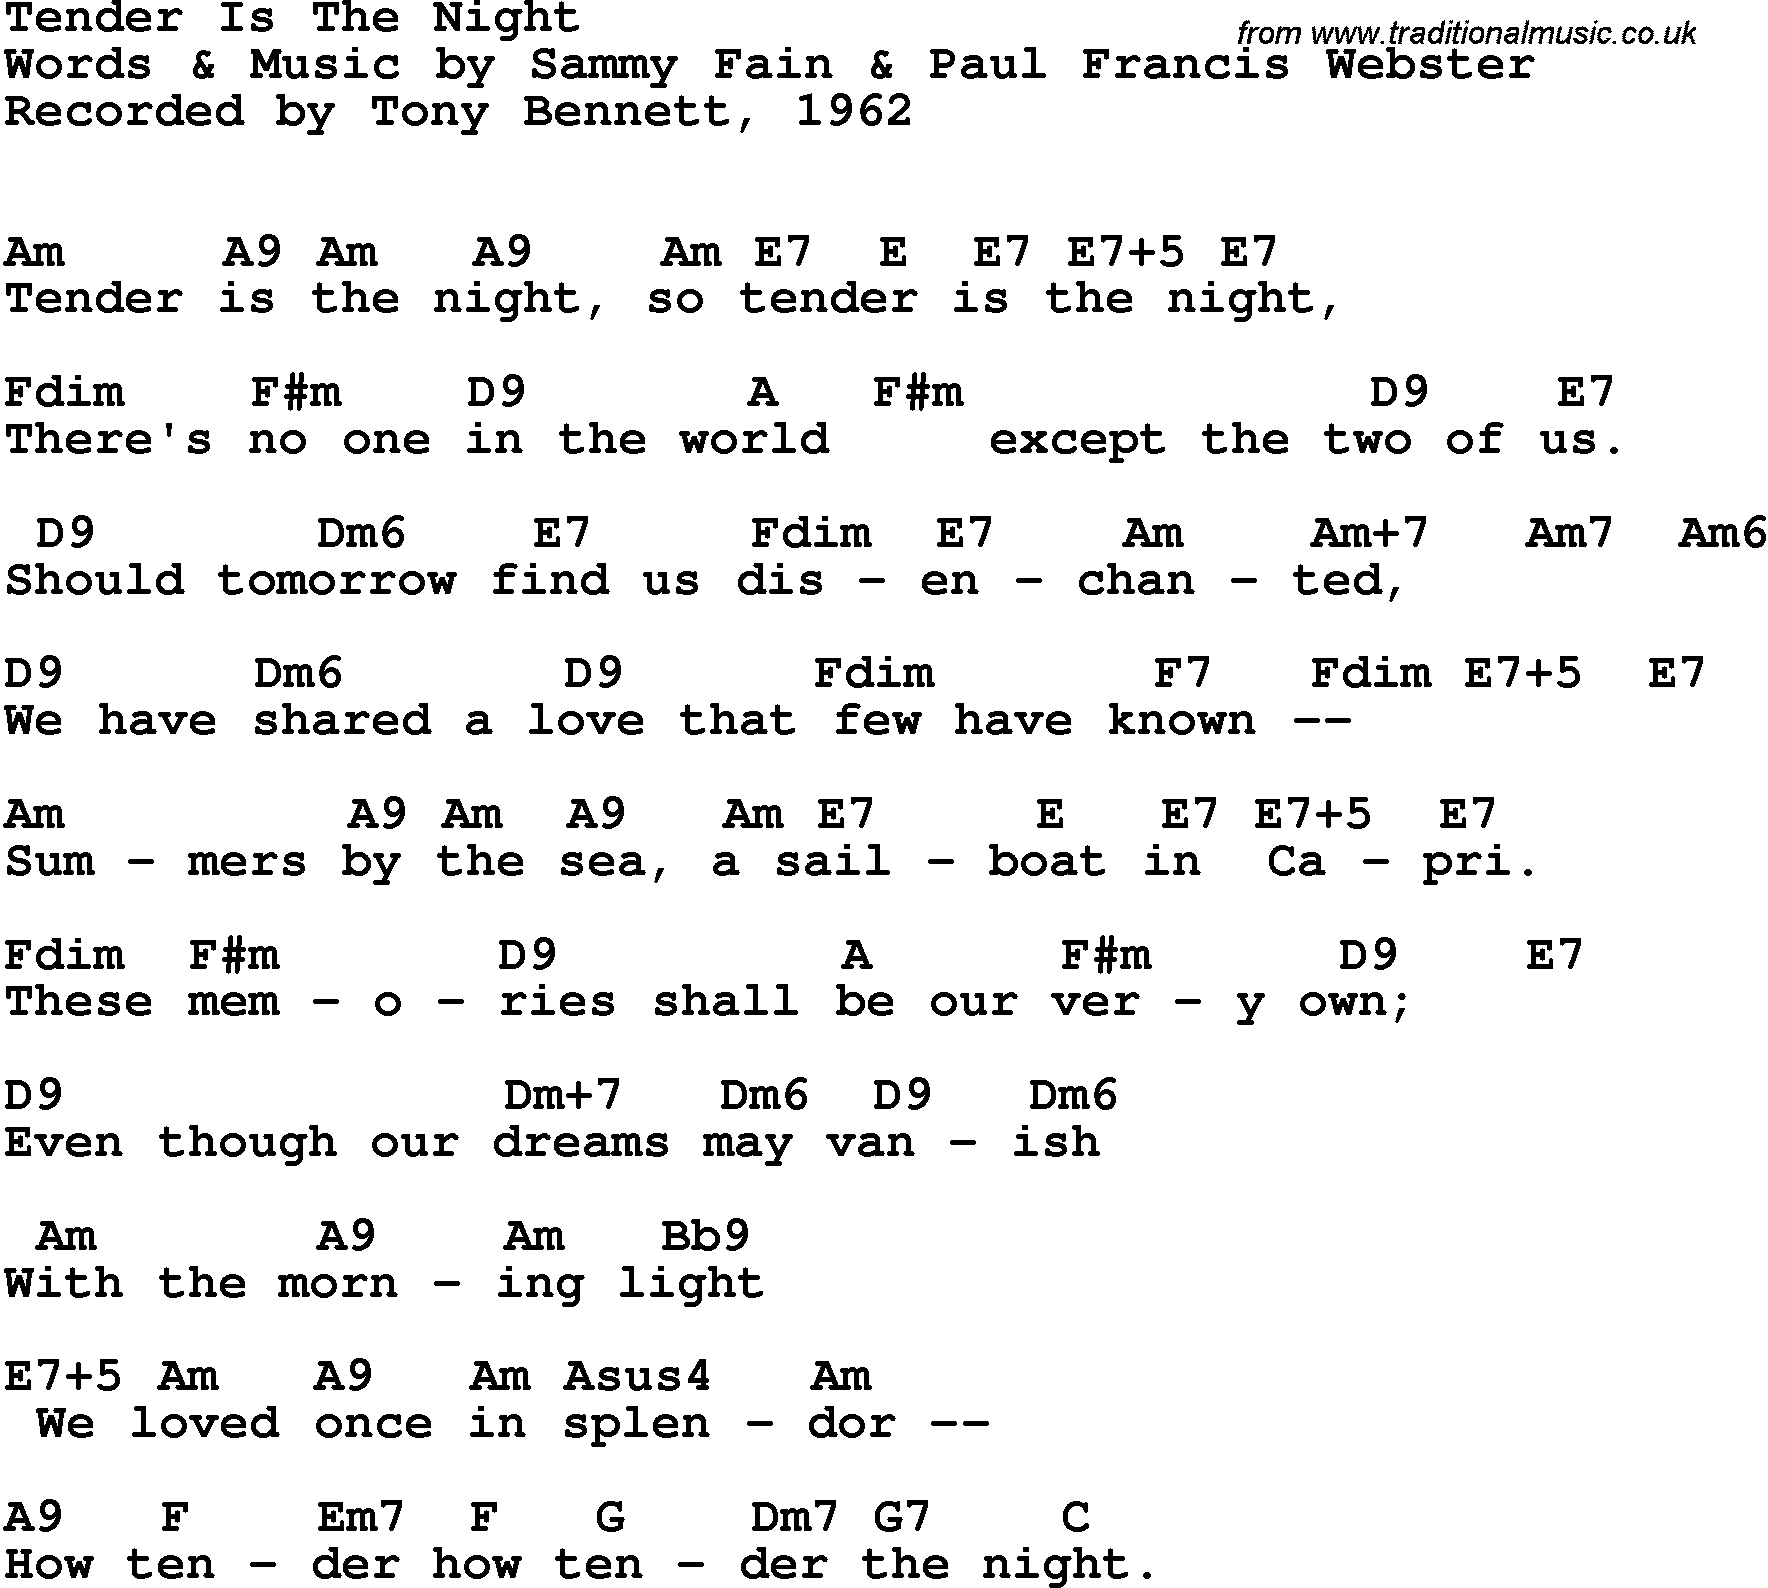 Song Lyrics with guitar chords for Tender Is The Night - Tony Bennett, 1962